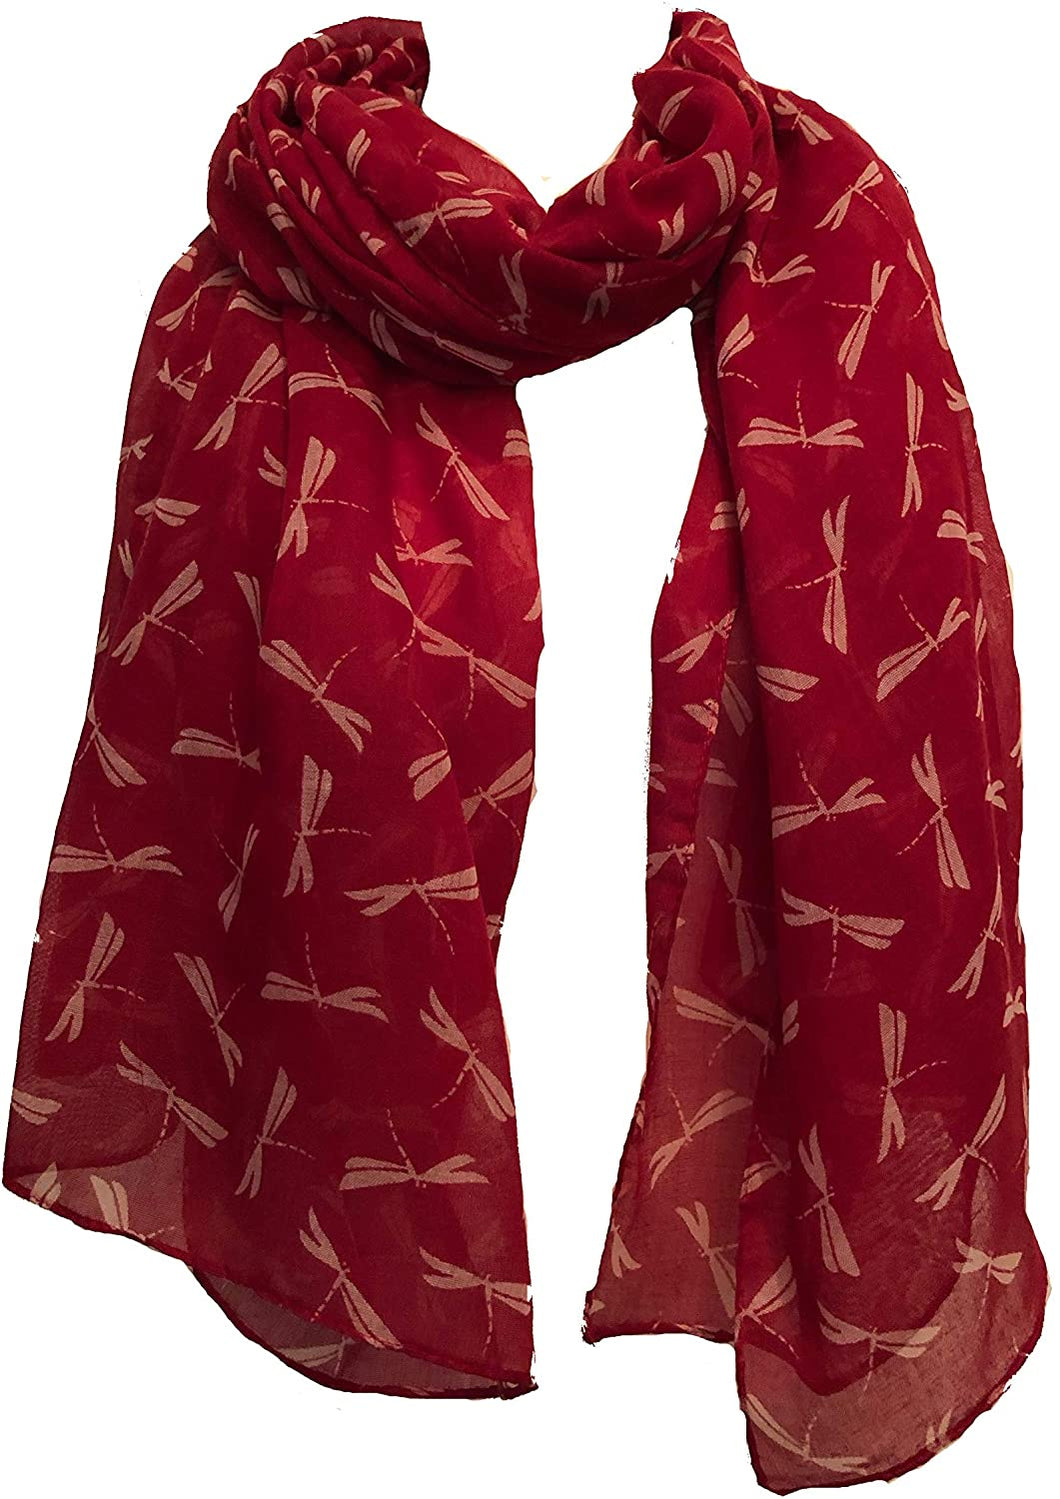 Pamper Yourself Now Ladies Scarf red with Beige Dragonfly Fashion Long Soft wrap/Sarong